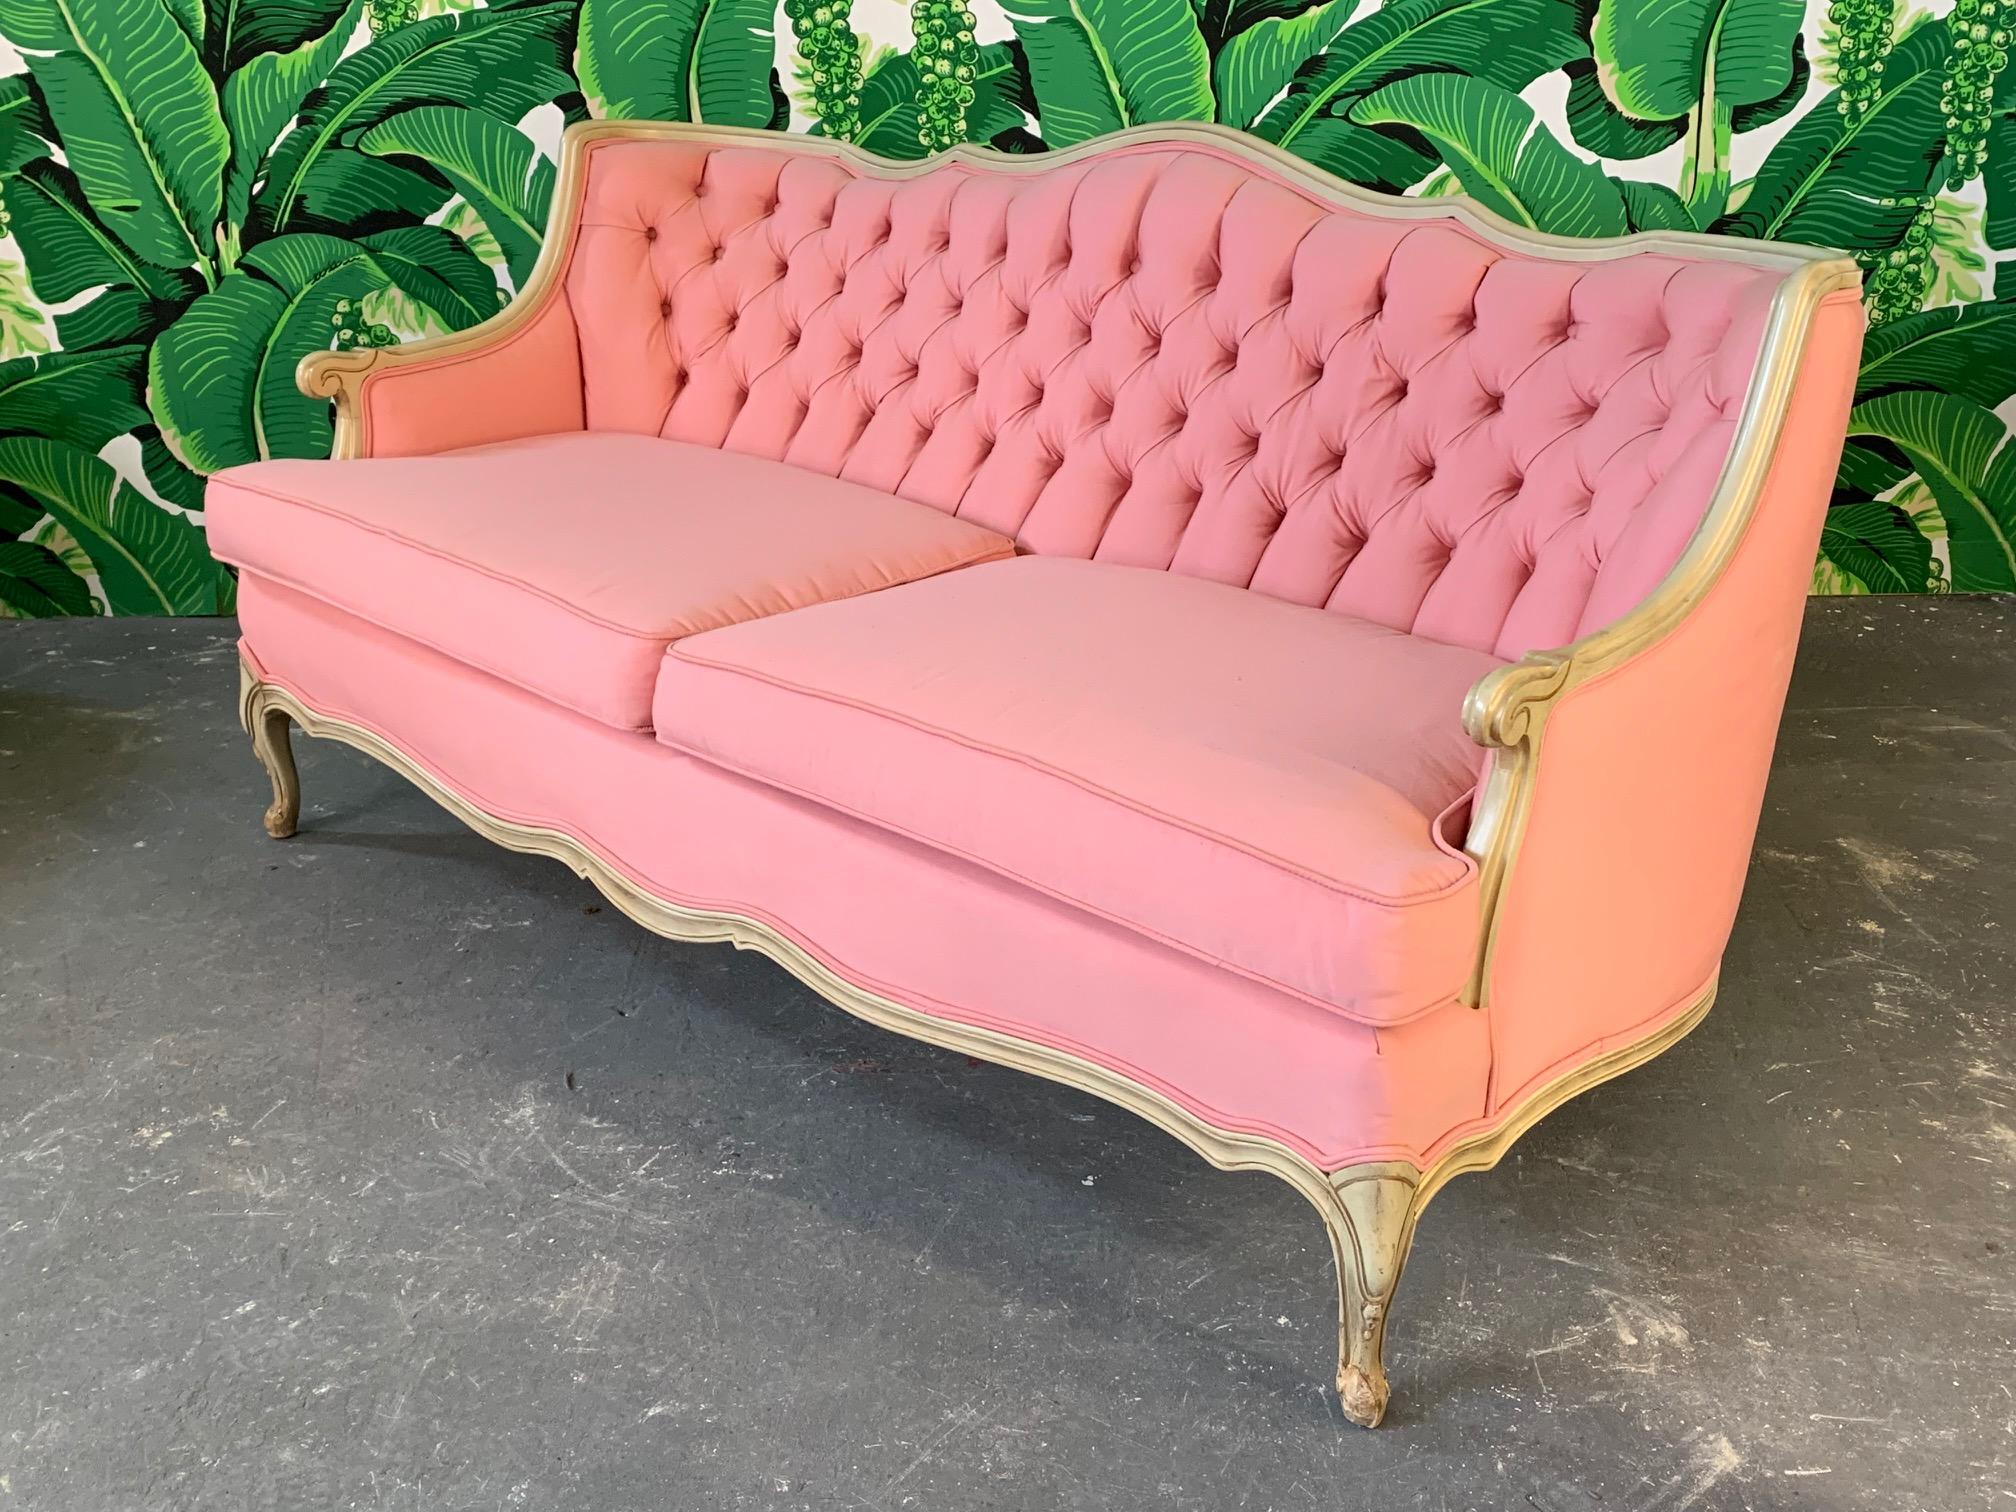 Fabulous pair of French Provincial style sofas newly upholstered in a pink durable heavyweight cotton fabric. Very good condition with only very minor imperfections consistent with age.